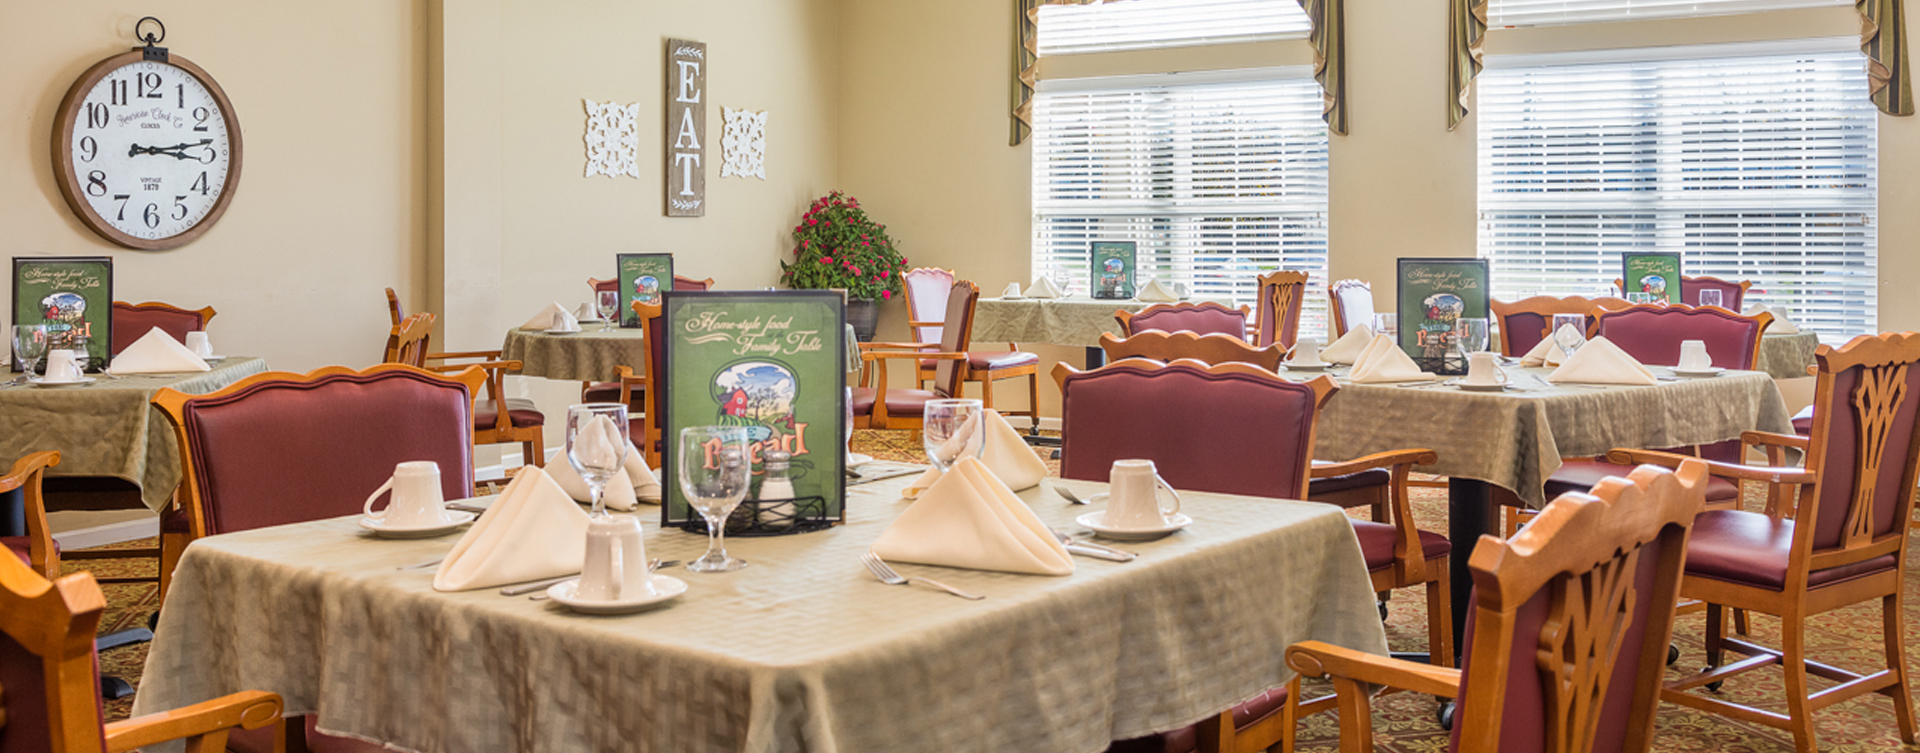 Enjoy restaurant -style meals served three times a day in our dining room at Bickford of Ames